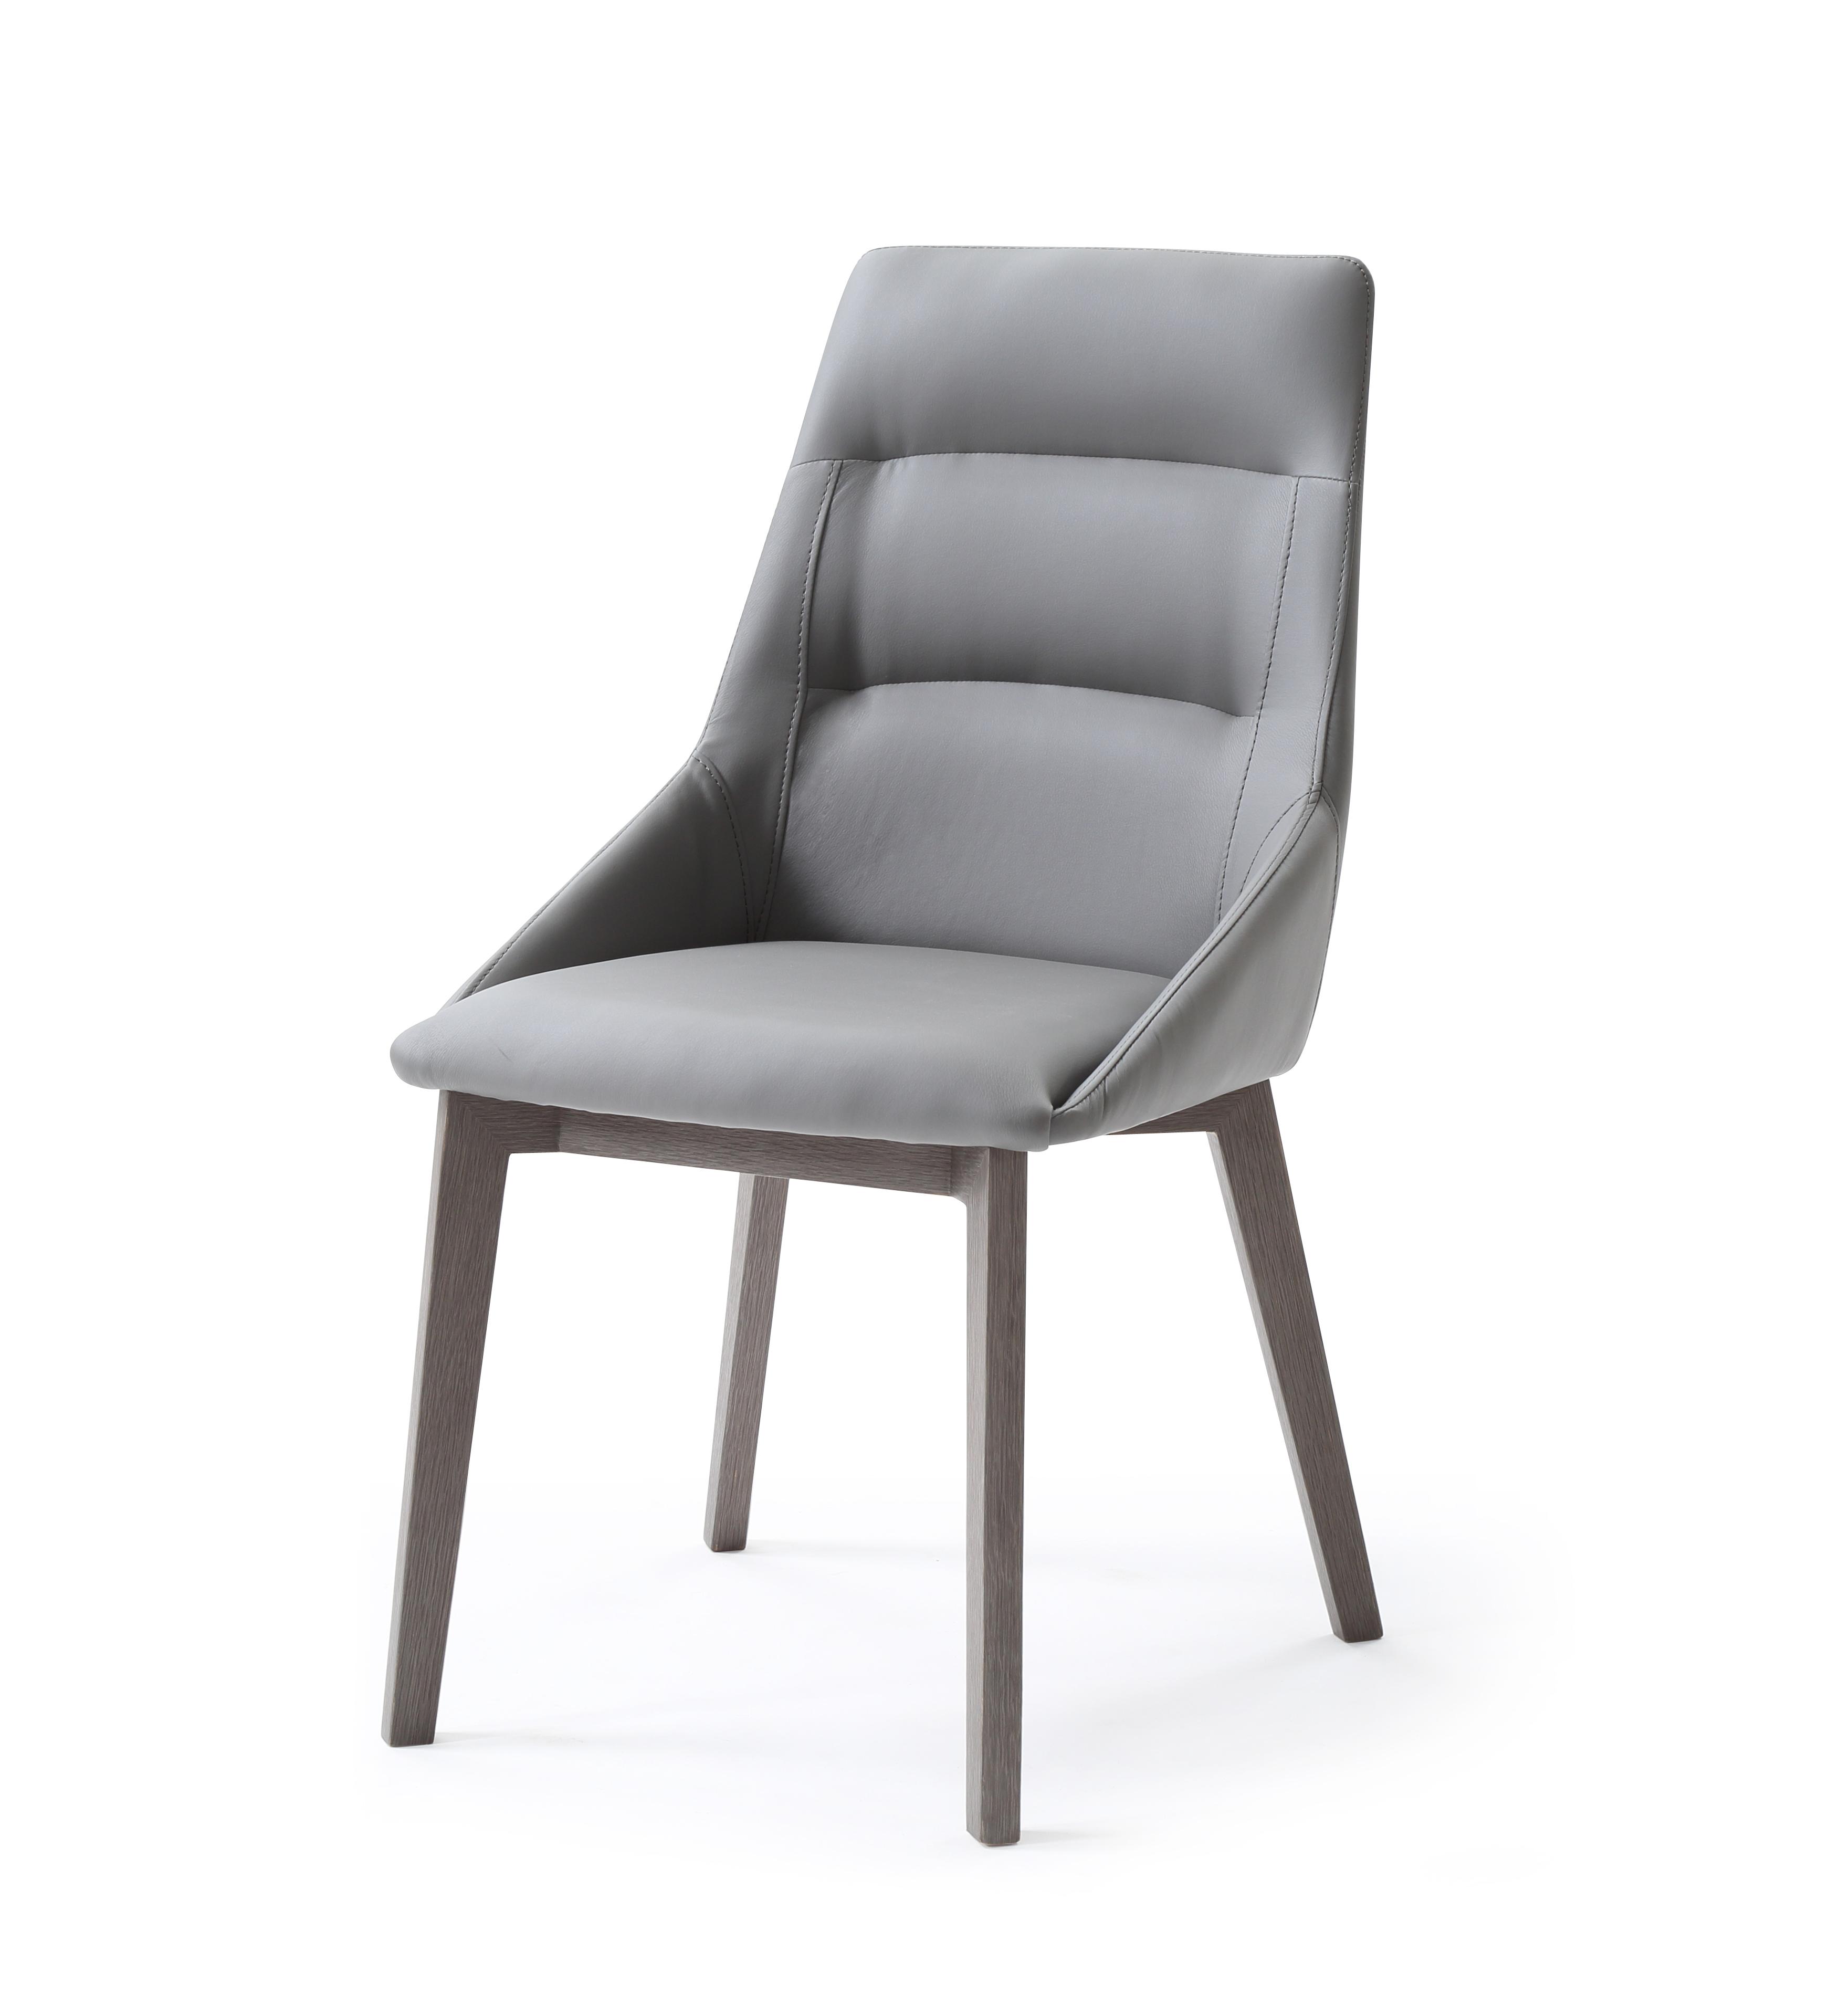 Modern Dining Chair Set DC1420-GRY/GRY Siena DC1420-GRY/GRY in Gray Faux Leather